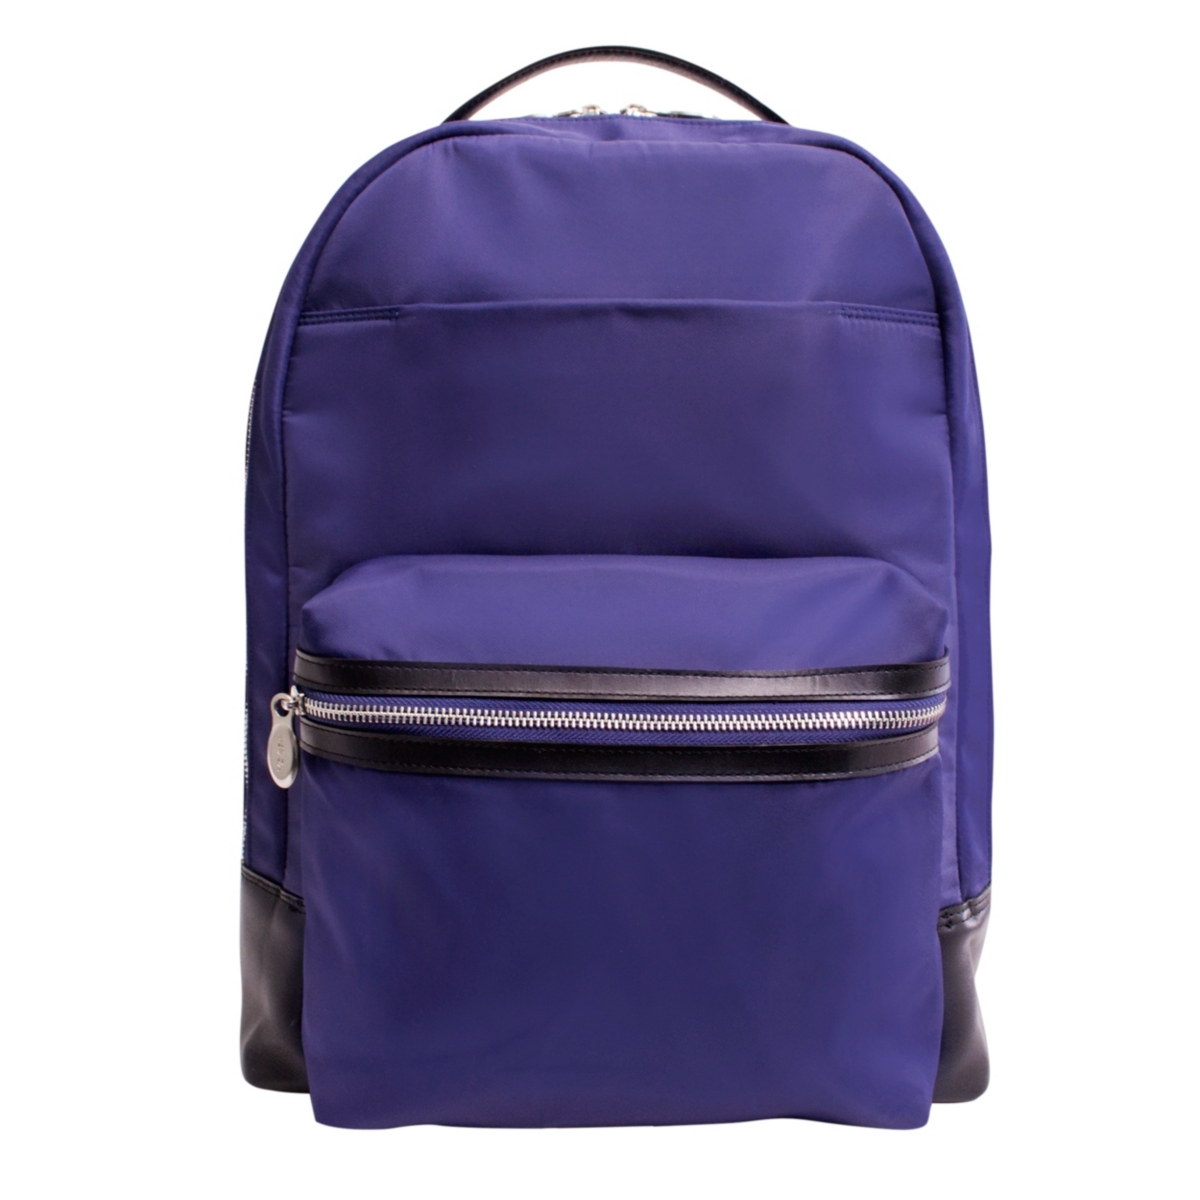 Parker, 15" Dual Compartment Laptop Backpack - Navy